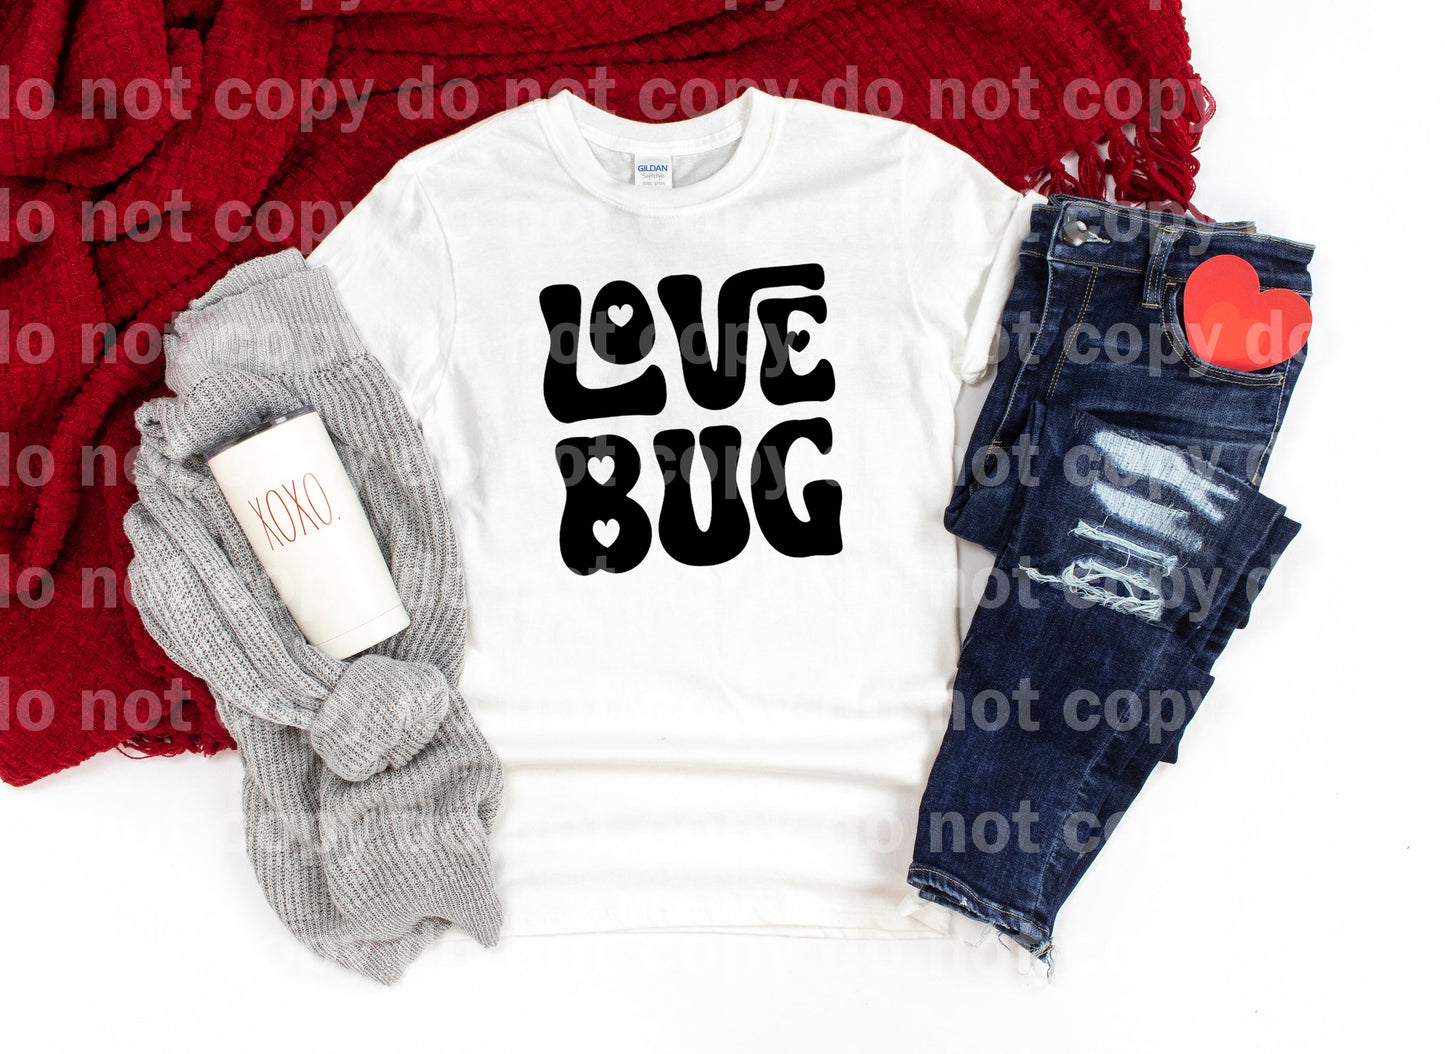 Love Bug Typography Black/White Dream Print or Sublimation Print